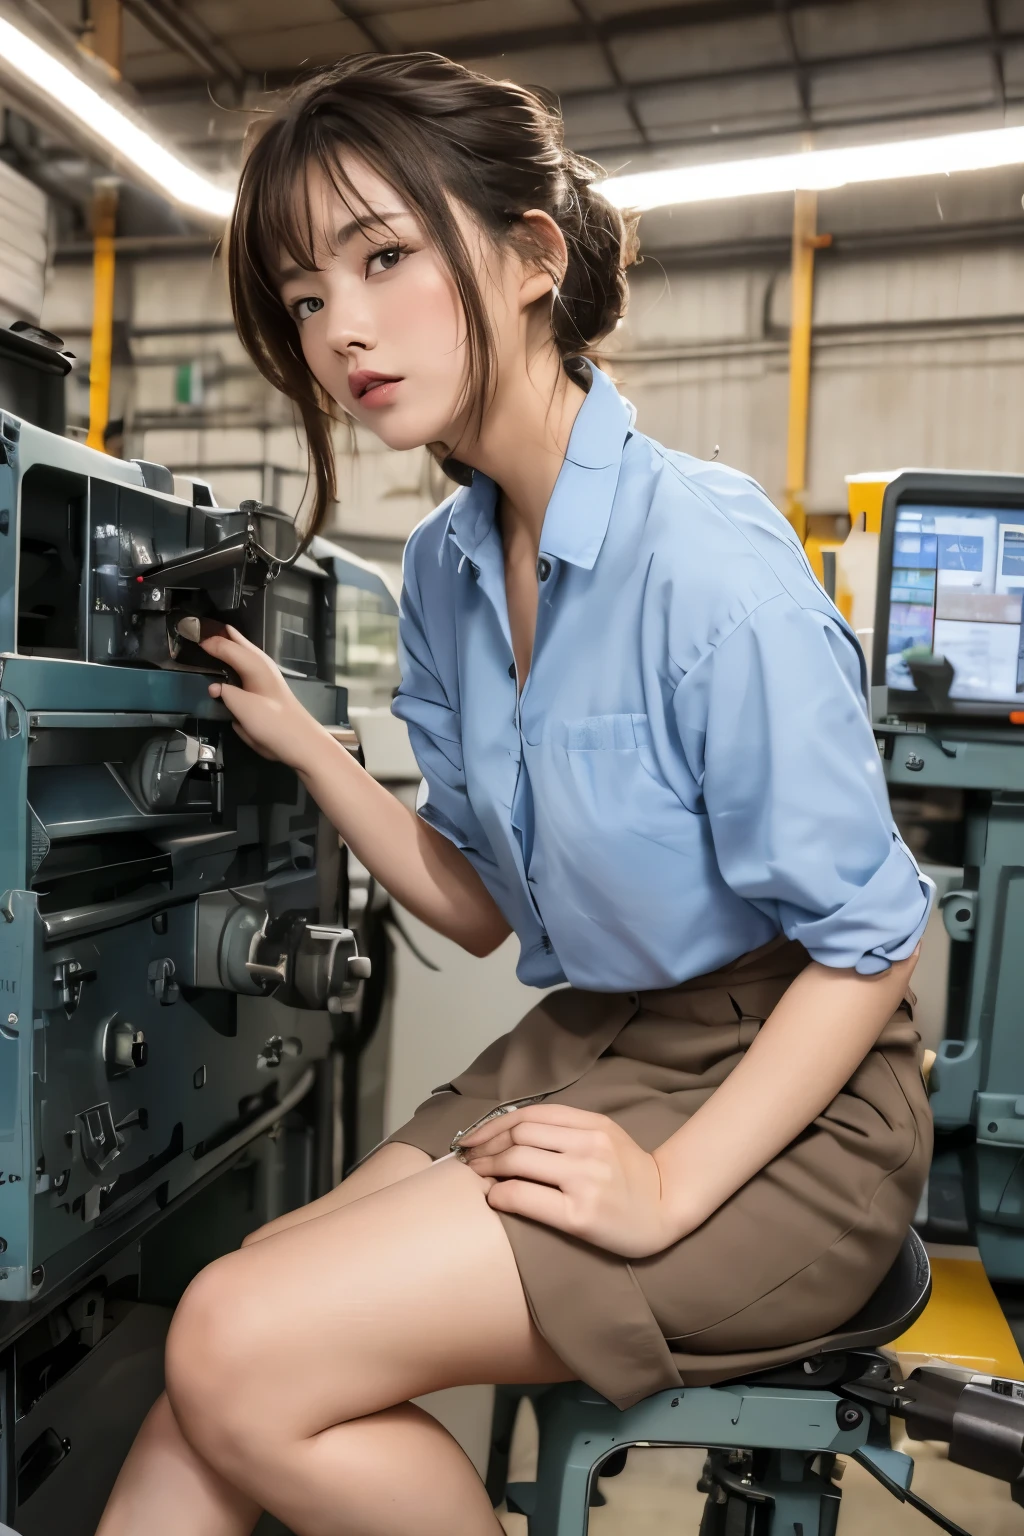 a women, (((round face, hair up))), factory clerk, wearing work clothes, long skirt, straddling to hit her crotch on a machine corner, open legs, raise leg, ecstasy face, in the factory, machines, ceiling, nameplate, id card